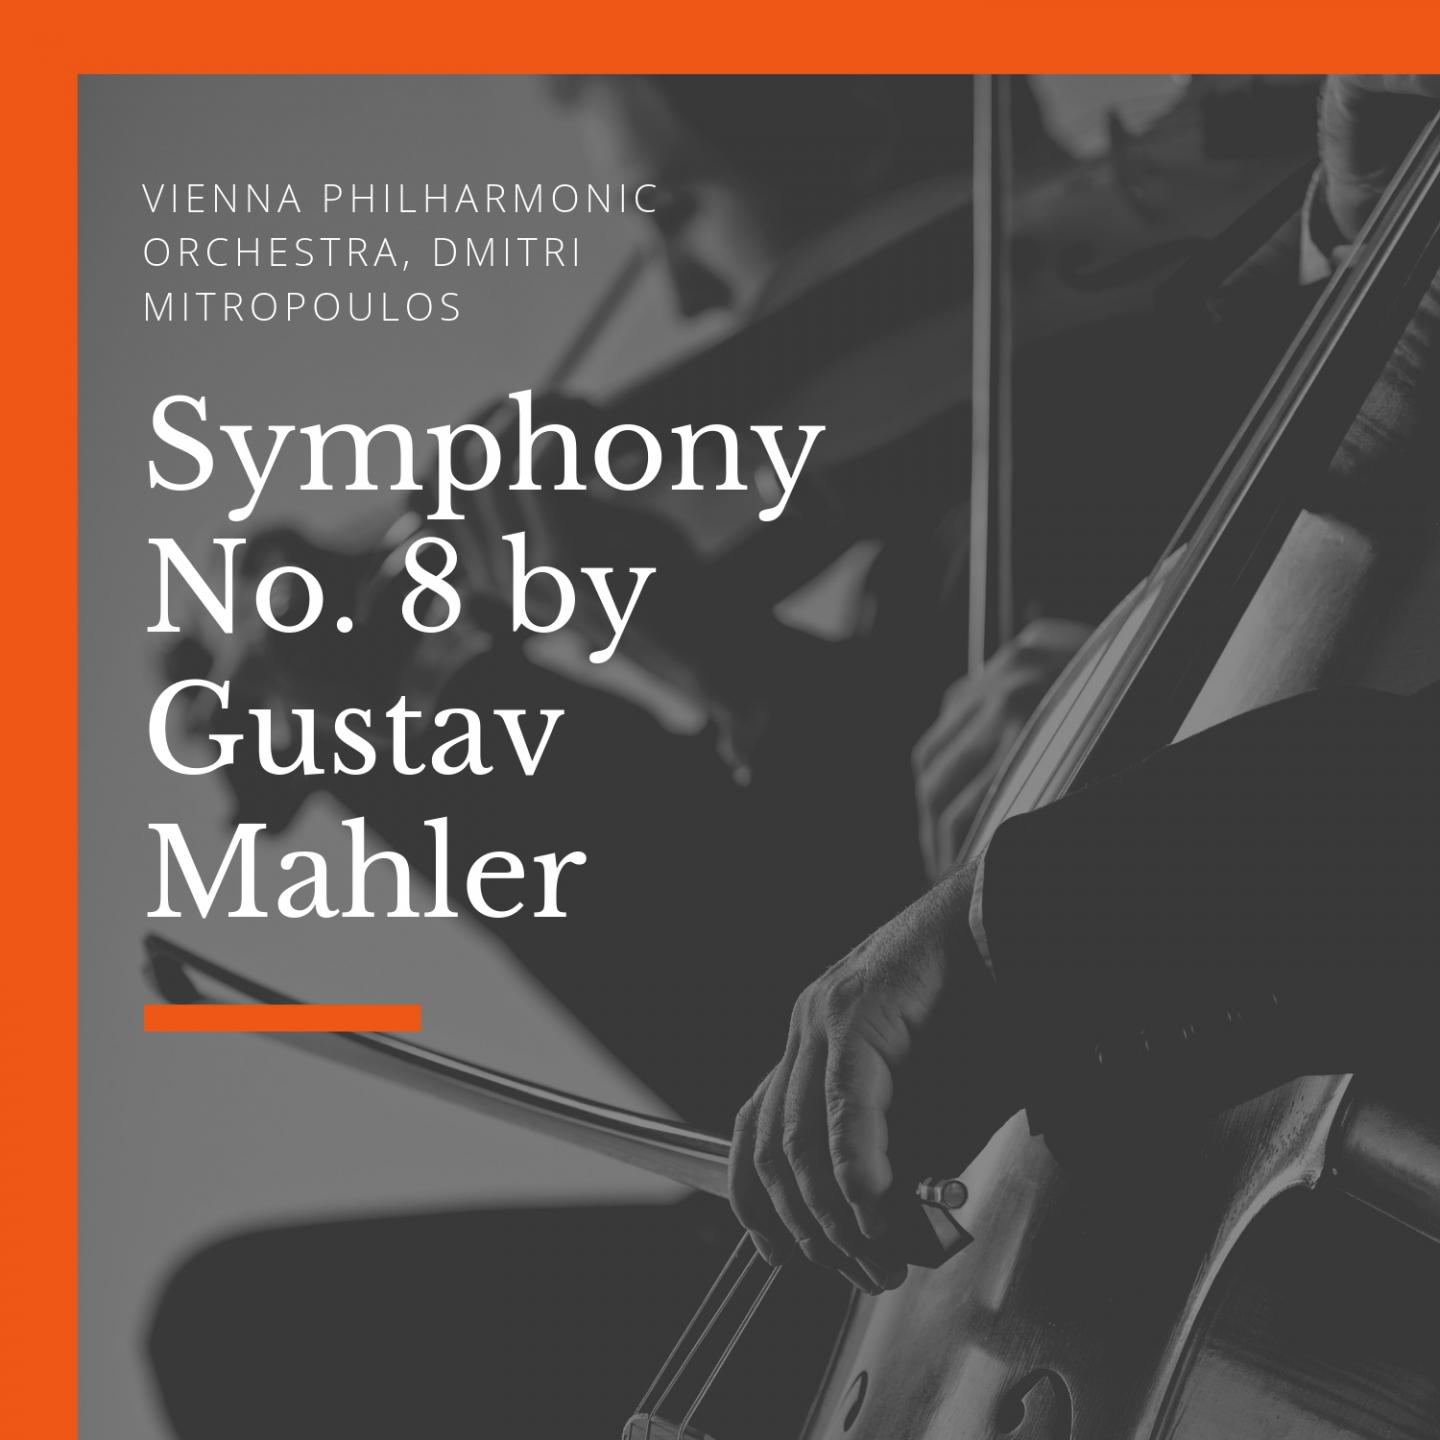 Symphony No. 8, in E-Flat Major, Part Two: II. Gerettet ist das edle Glied